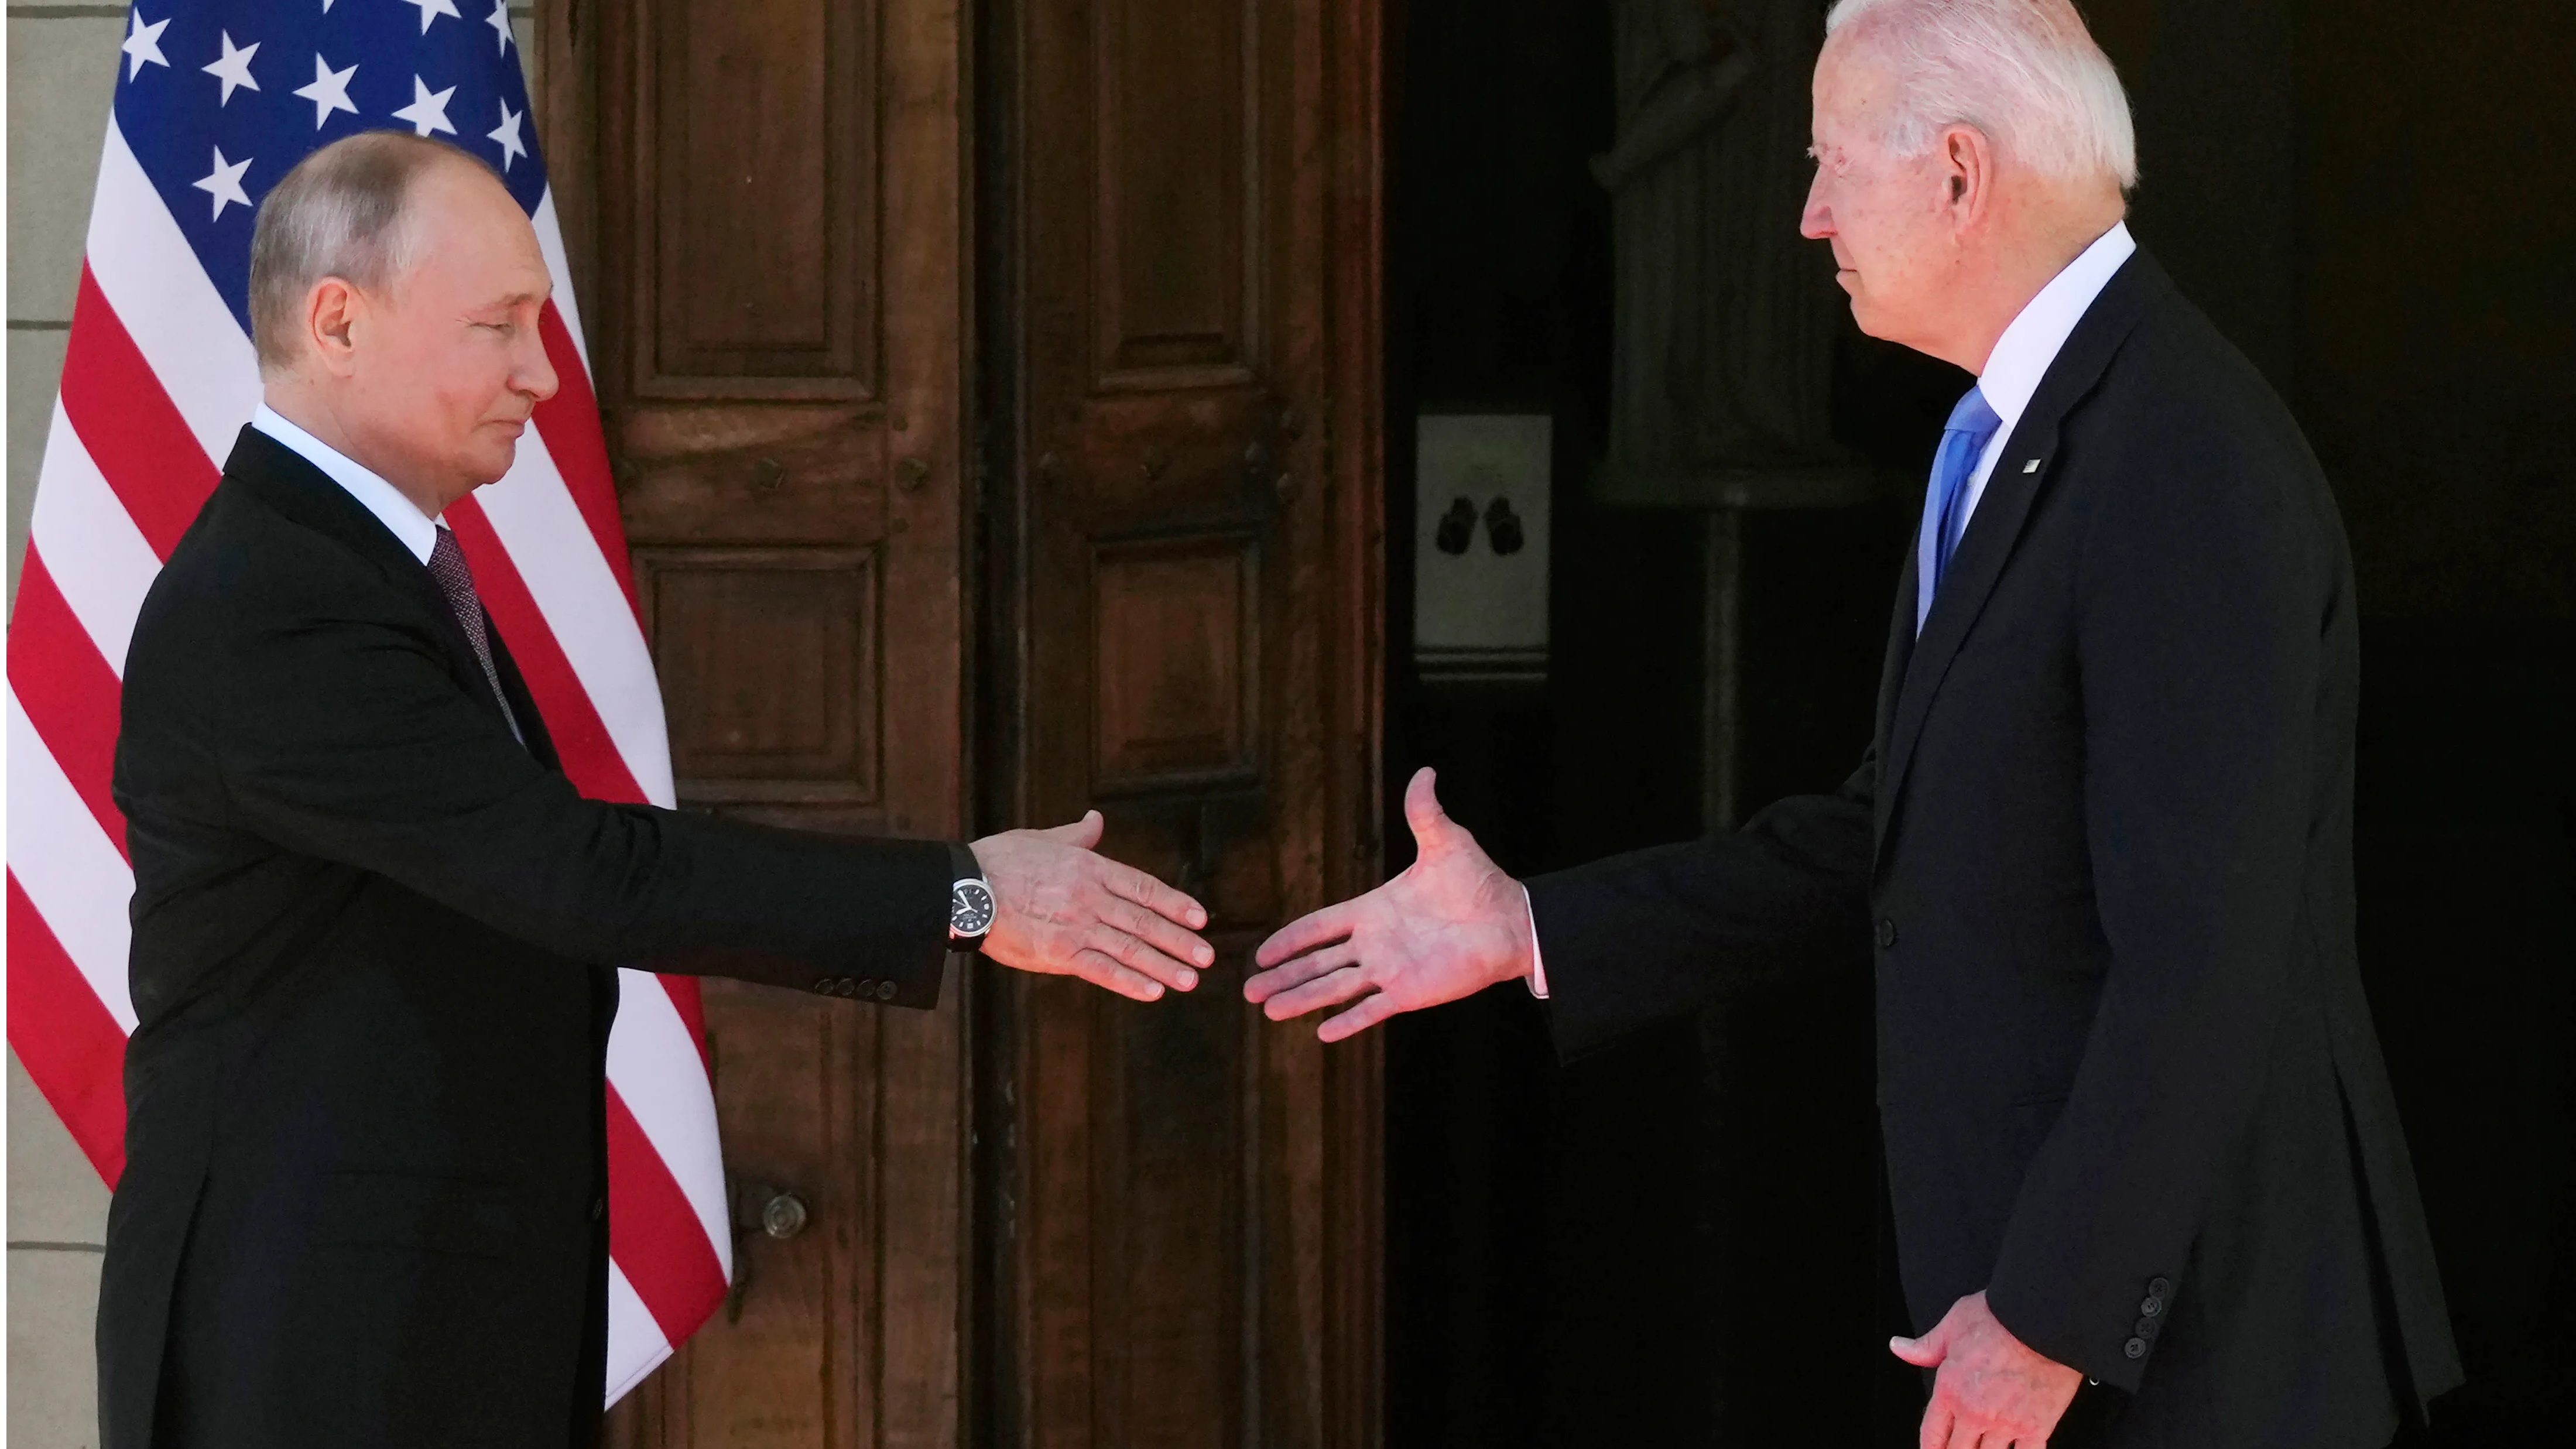 The handshake after COVID-19 — good riddance, or welcome back?